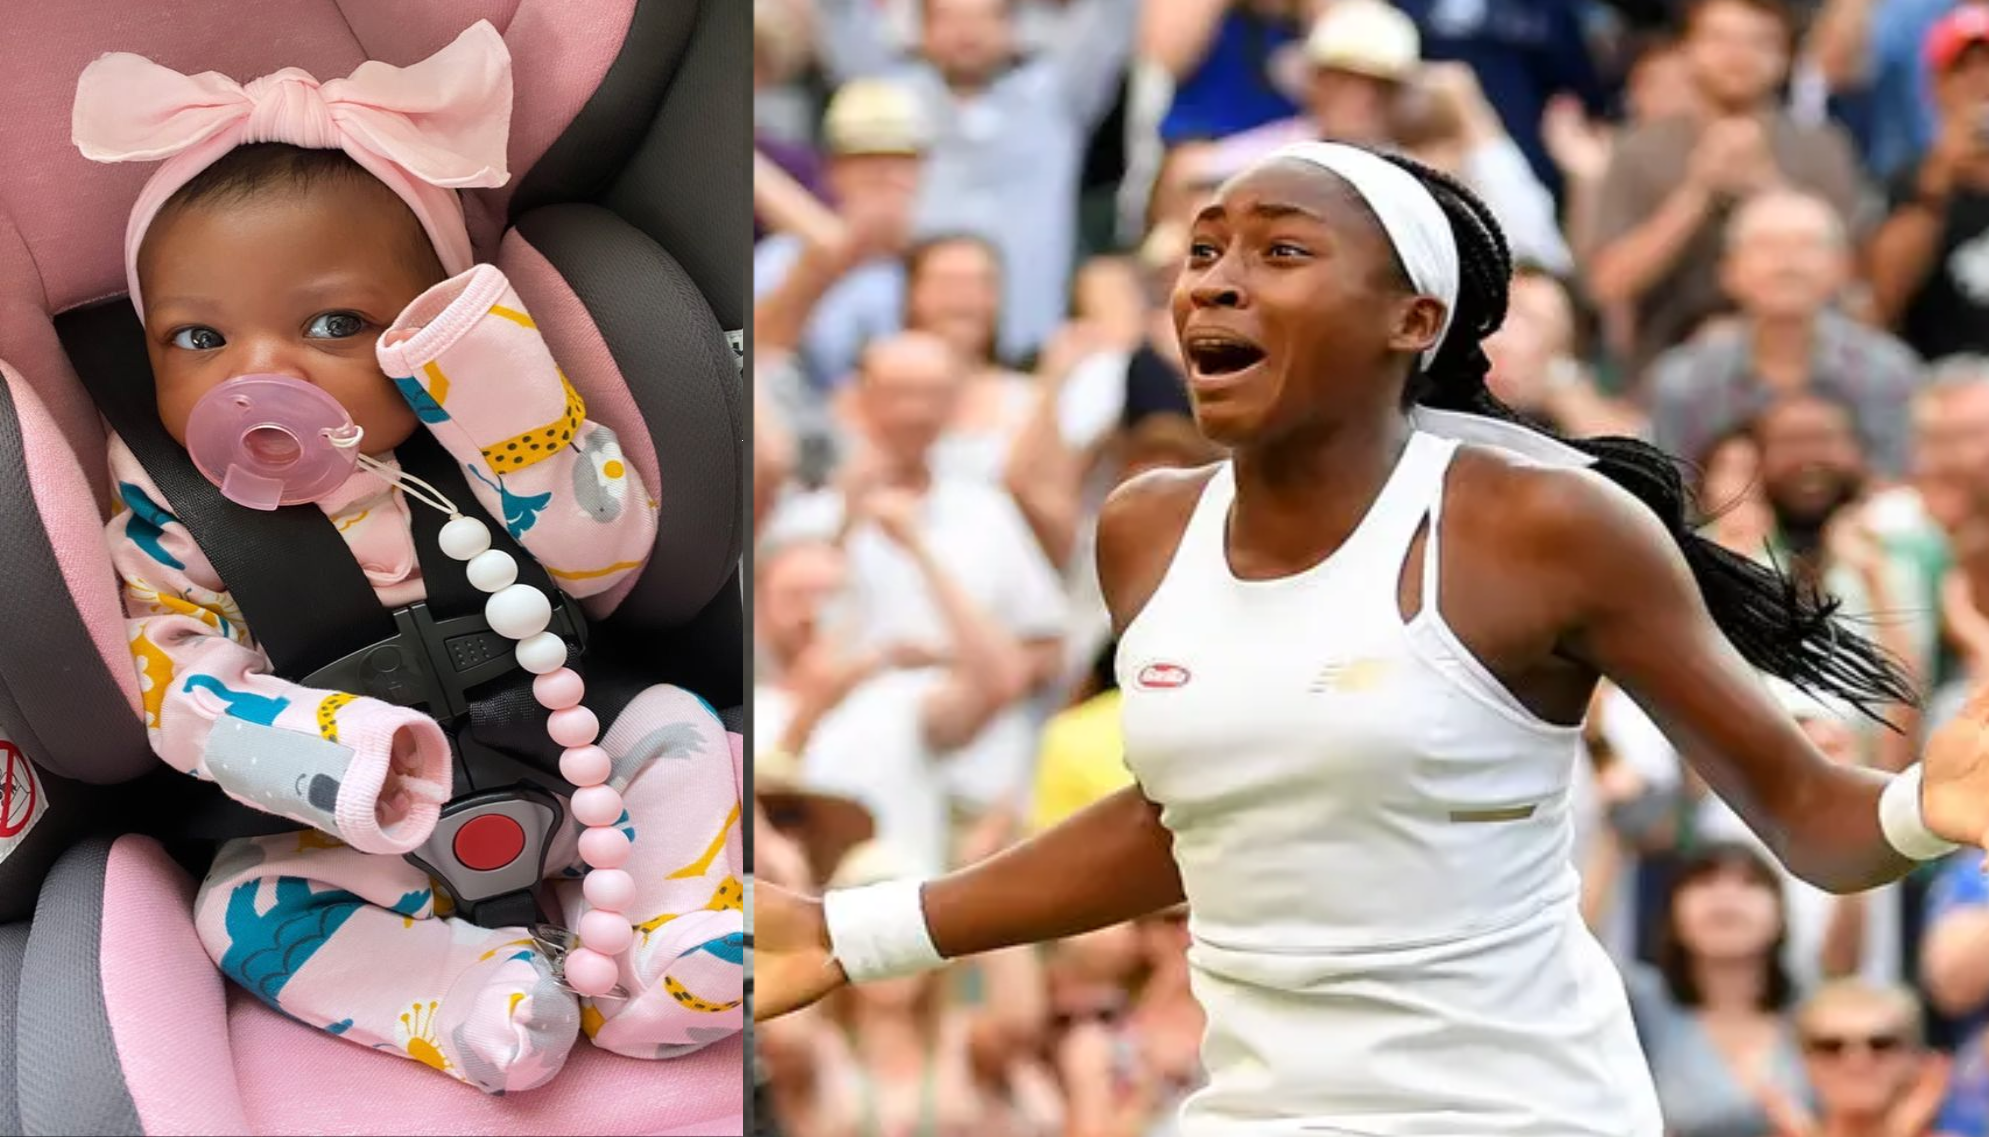 “It has always been my dream to be a mother,” said Coco Gauff, 20 years old, as she was overjoyed and left in tears while welcoming her first baby with her boyfriend.